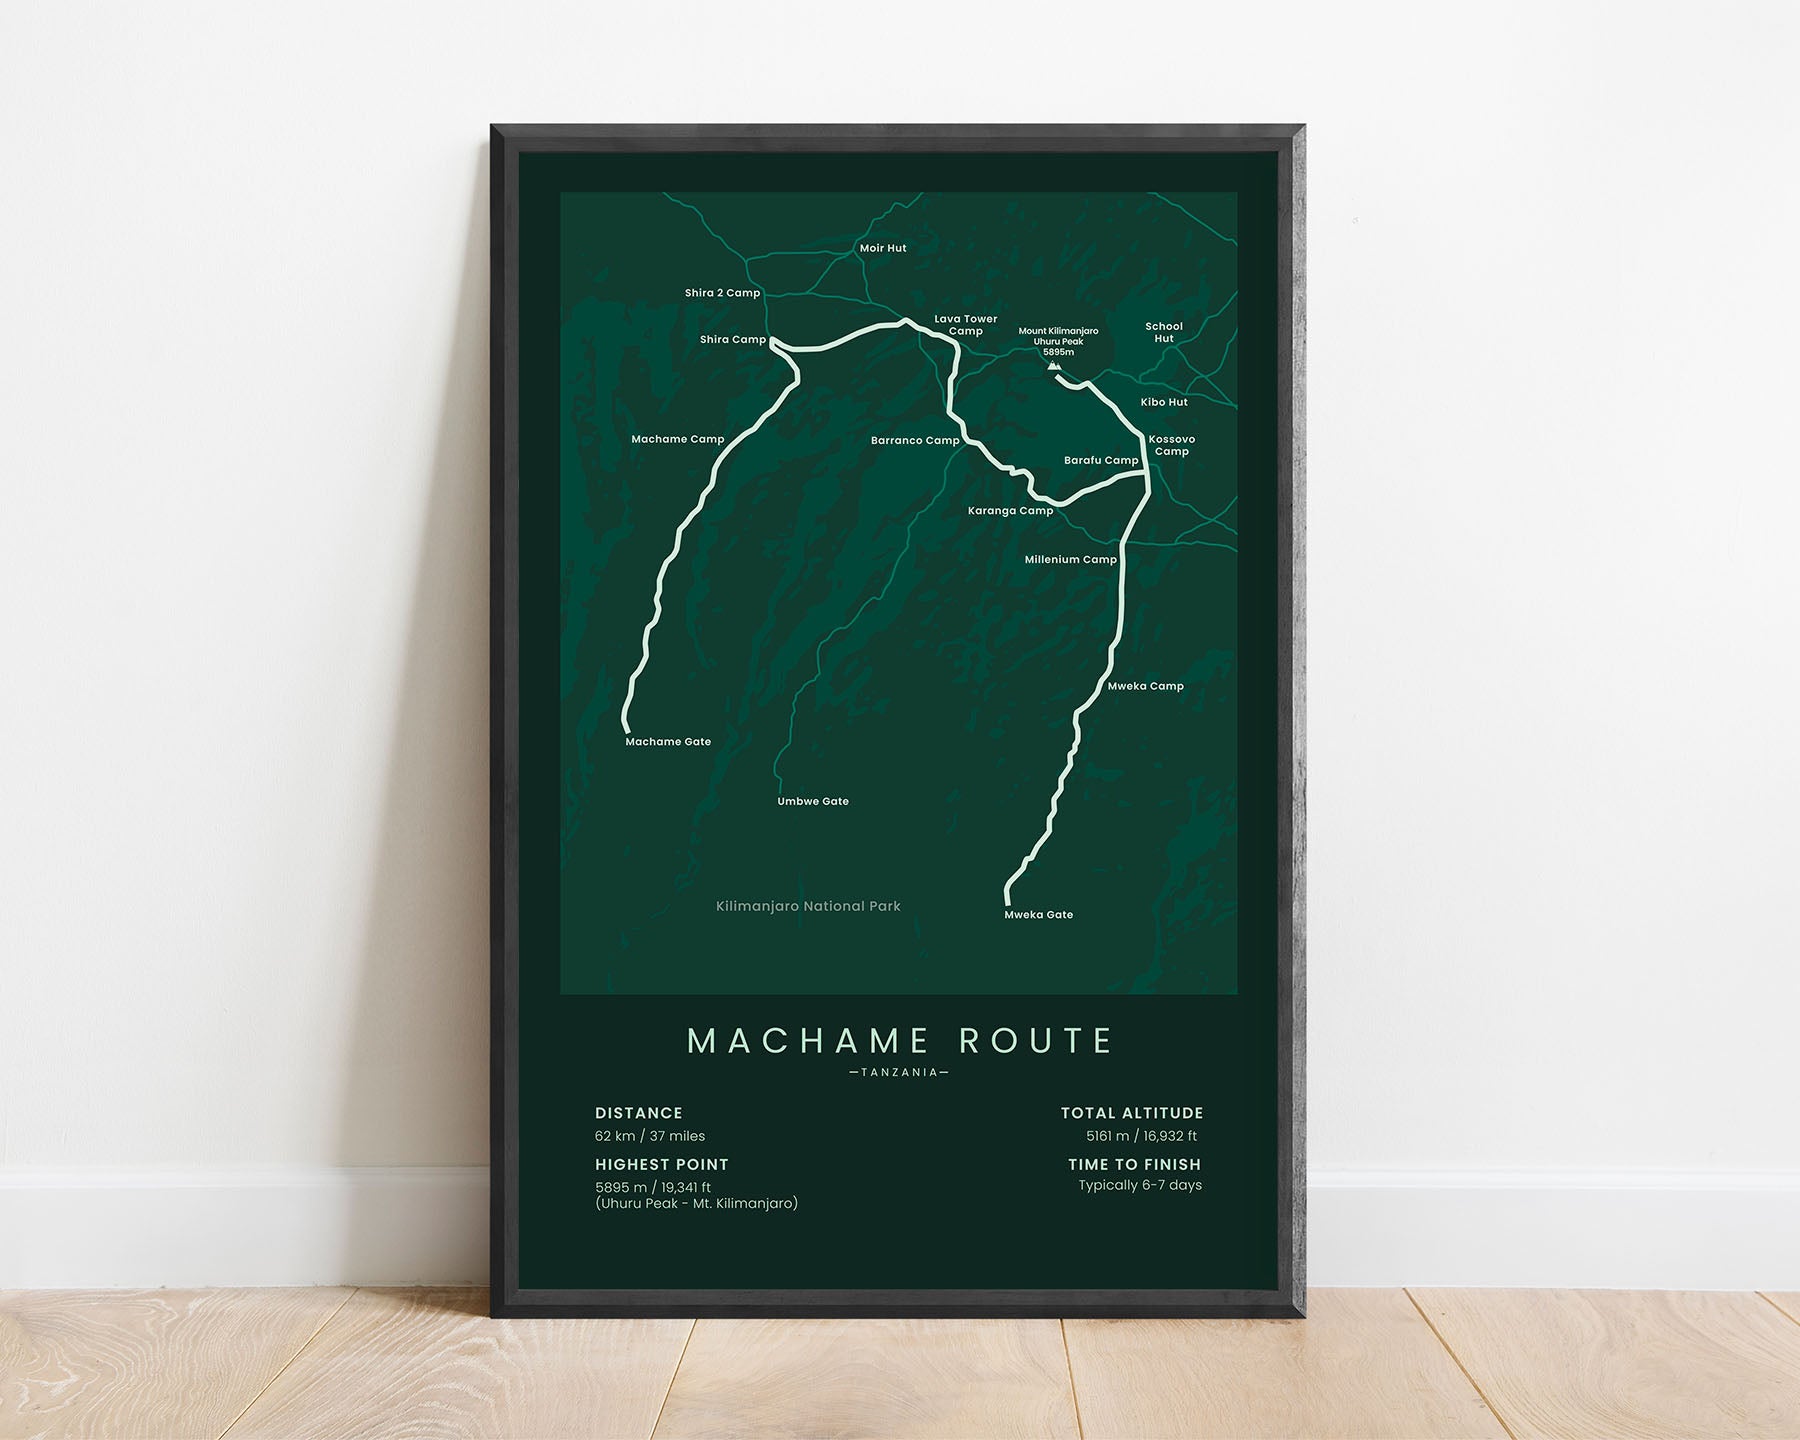 Machame Route (Africa) path art print with green background